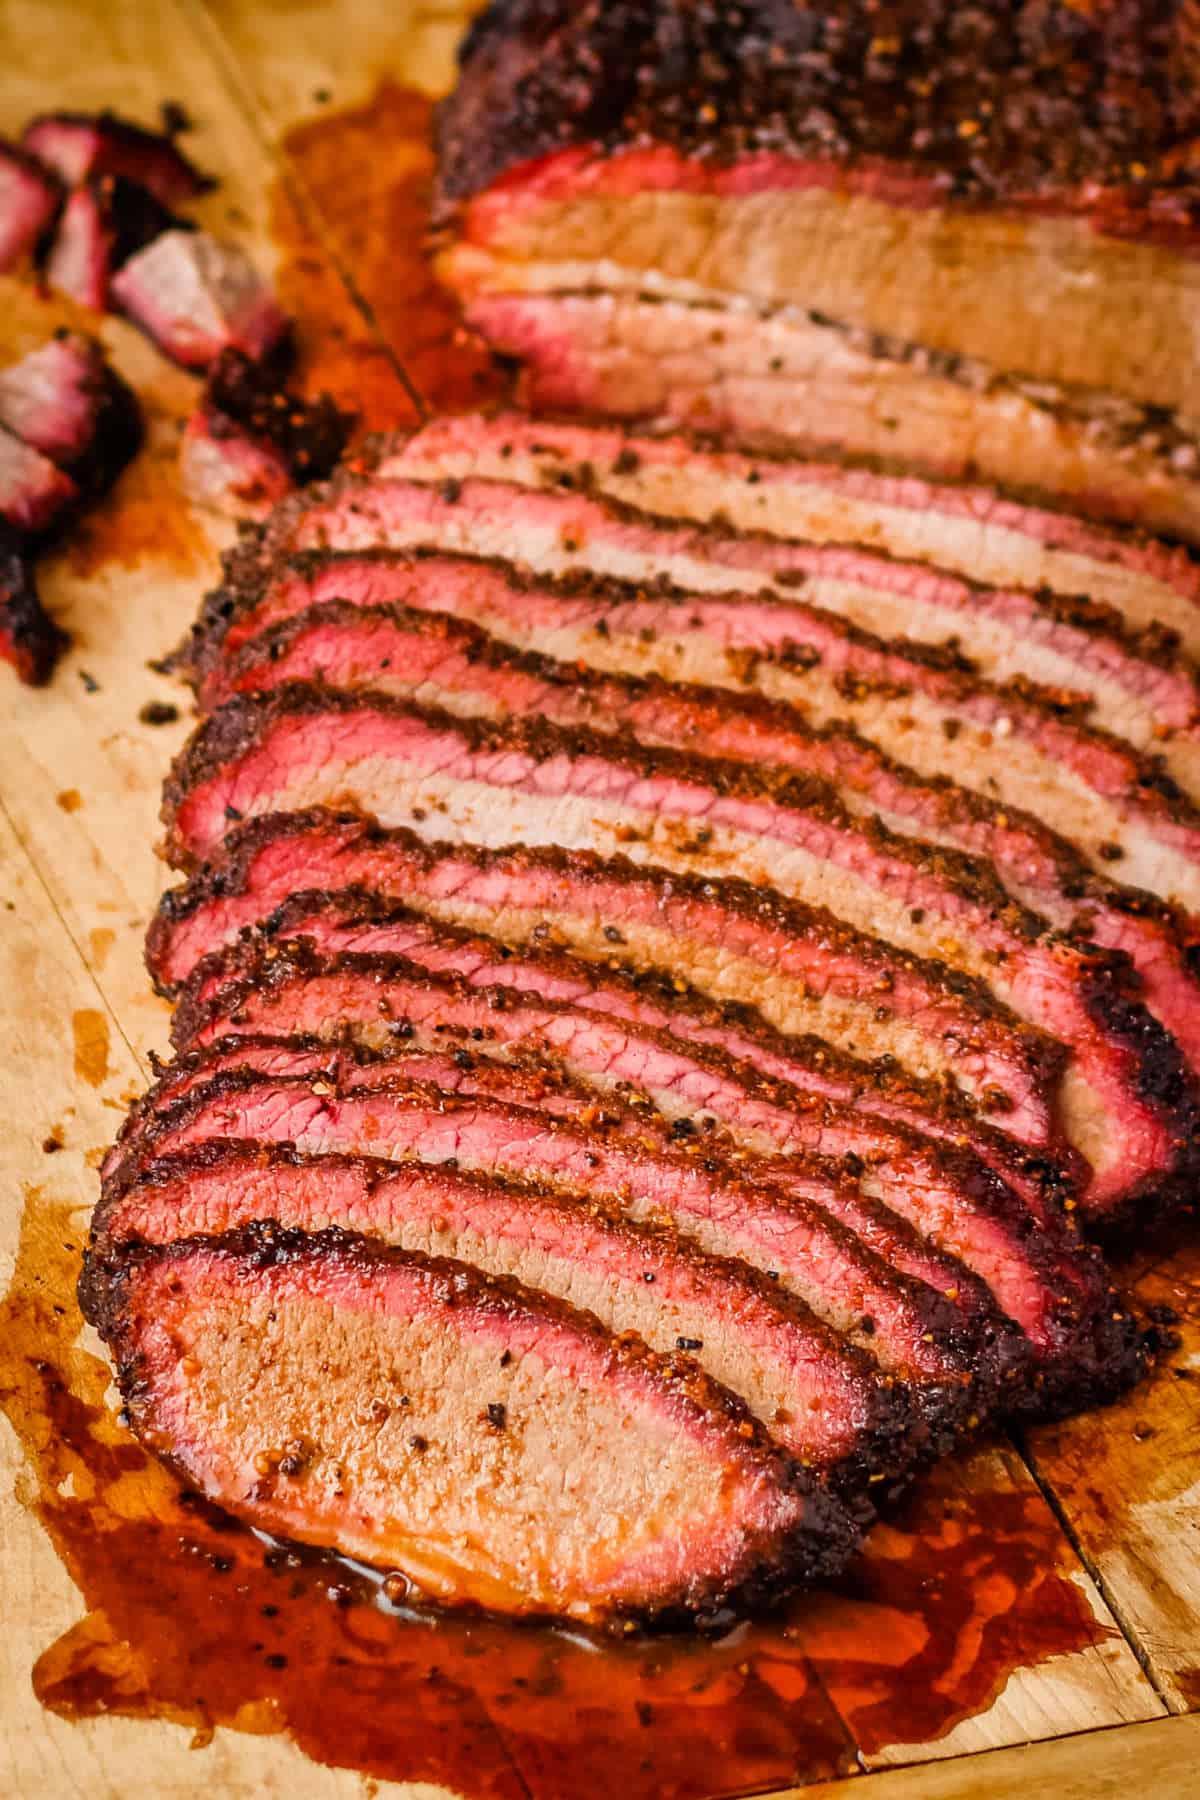 Sliced smoked brisket on a wooden cutting board.